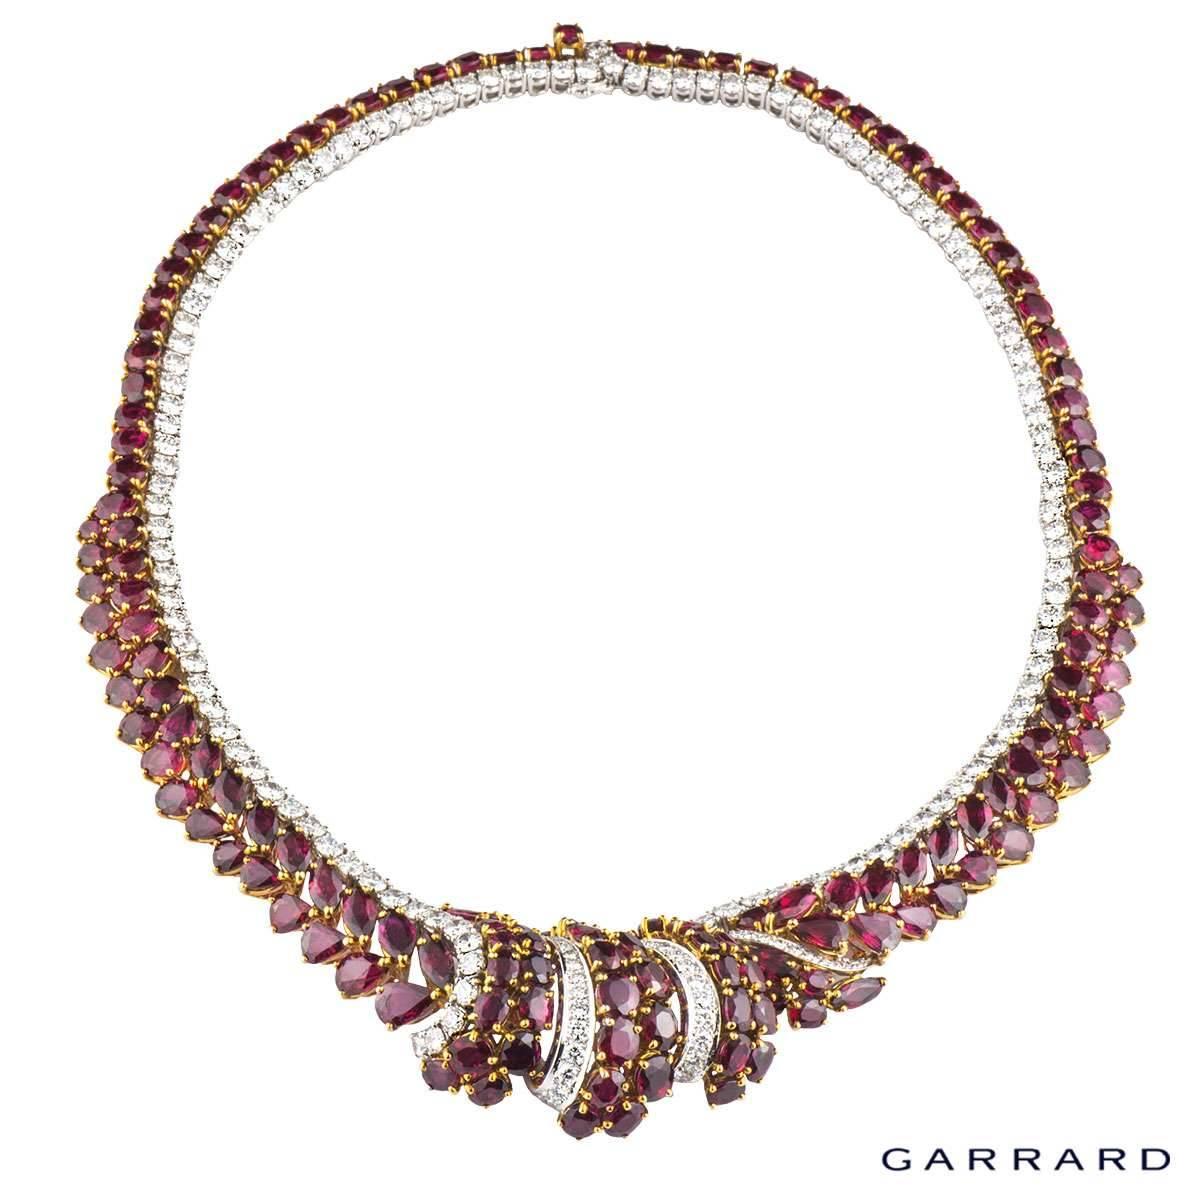 An exquisite ruby and diamond necklace by Garrard c.1996. The centre of the necklace features a graduated scroll design and is comprised of 151 rubies, each intricately set in 18k yellow gold. The rubies are a mix of round, pear, oval and marquise